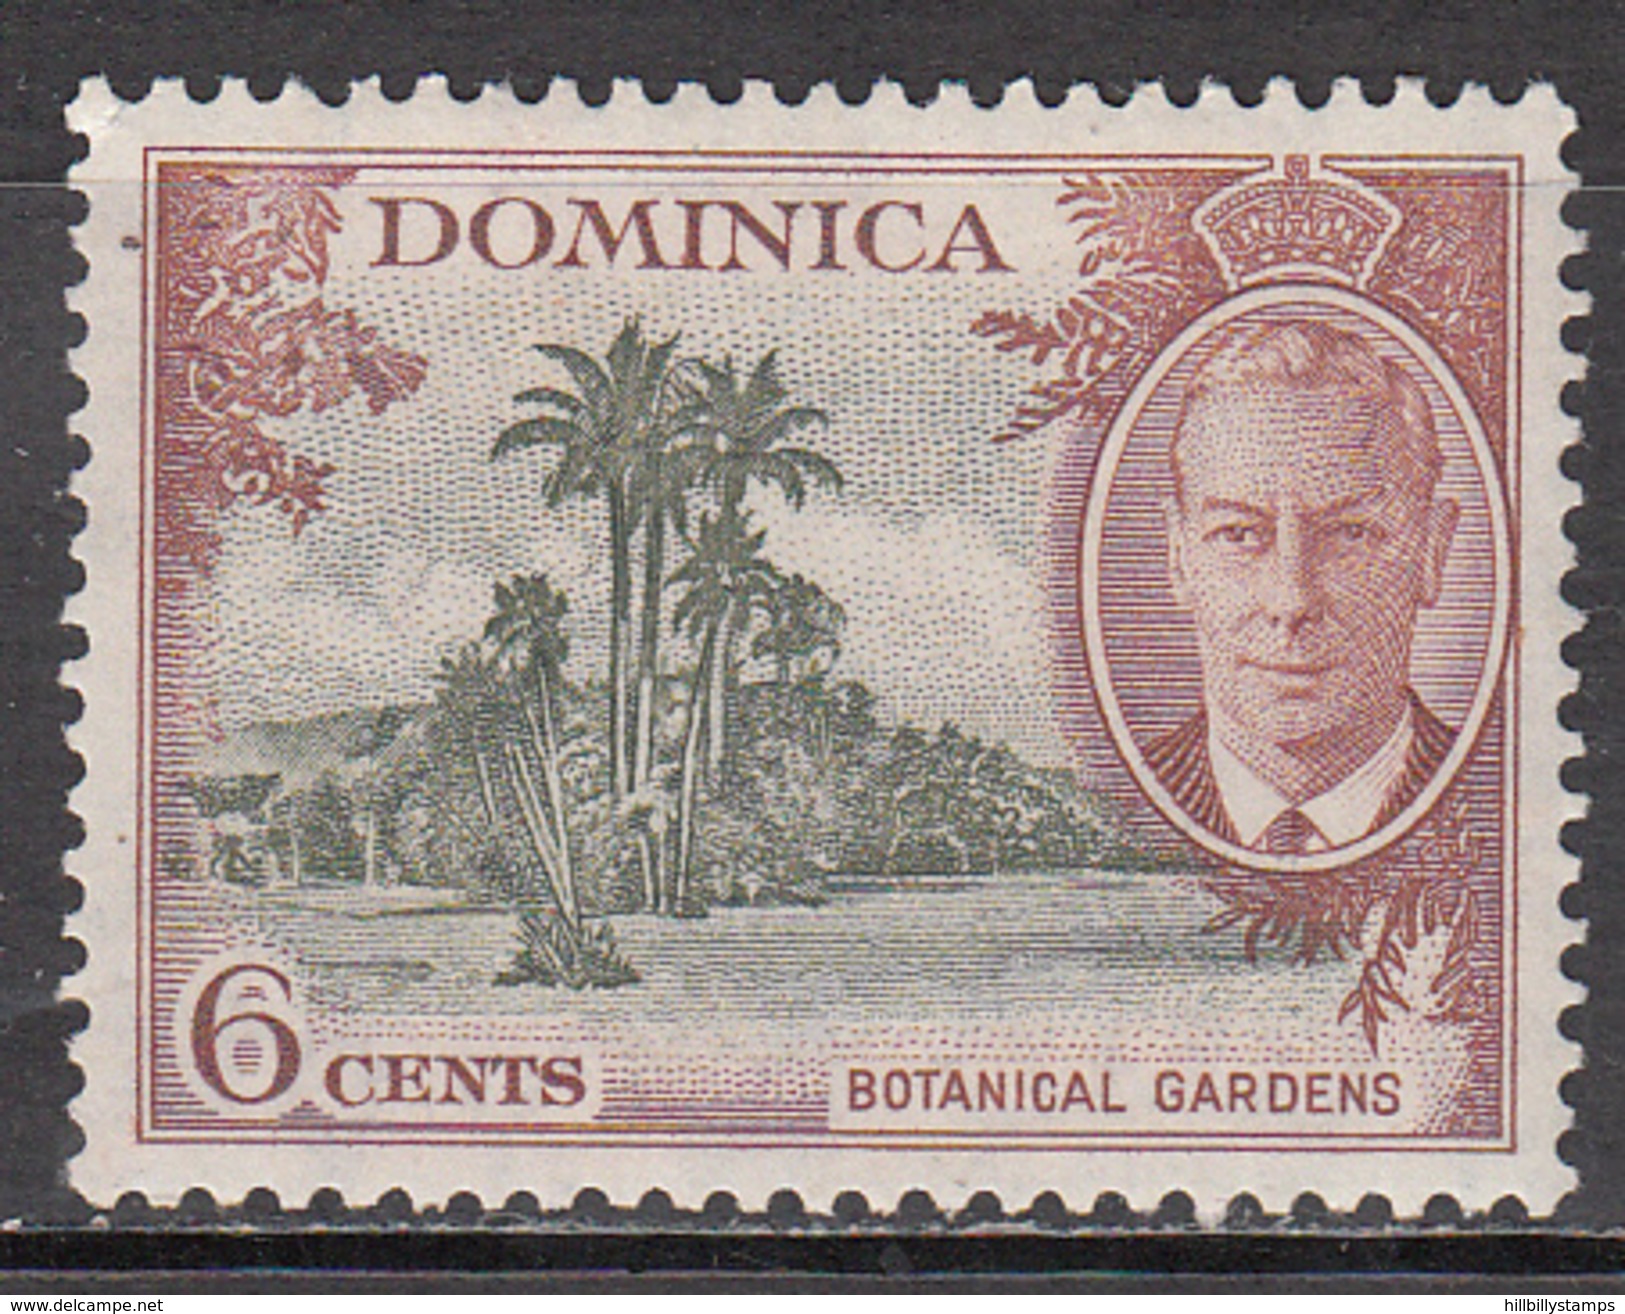 DOMINICA   SCOTT NO. 128   MINT HINGED     YEAR  1951 - Dominica (...-1978)